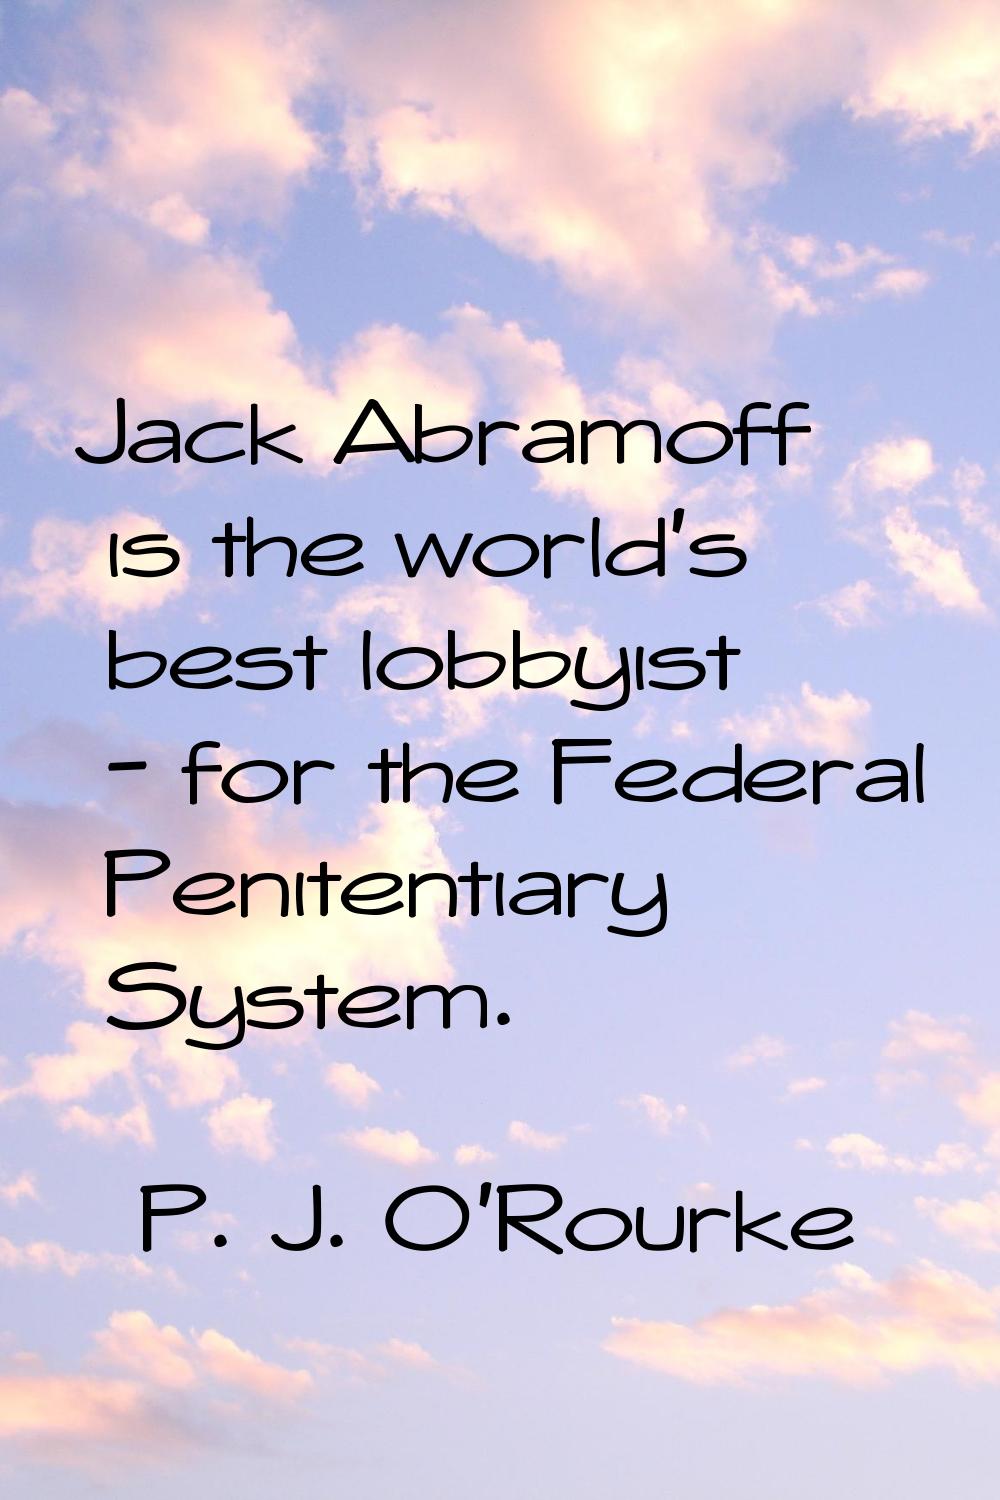 Jack Abramoff is the world's best lobbyist - for the Federal Penitentiary System.